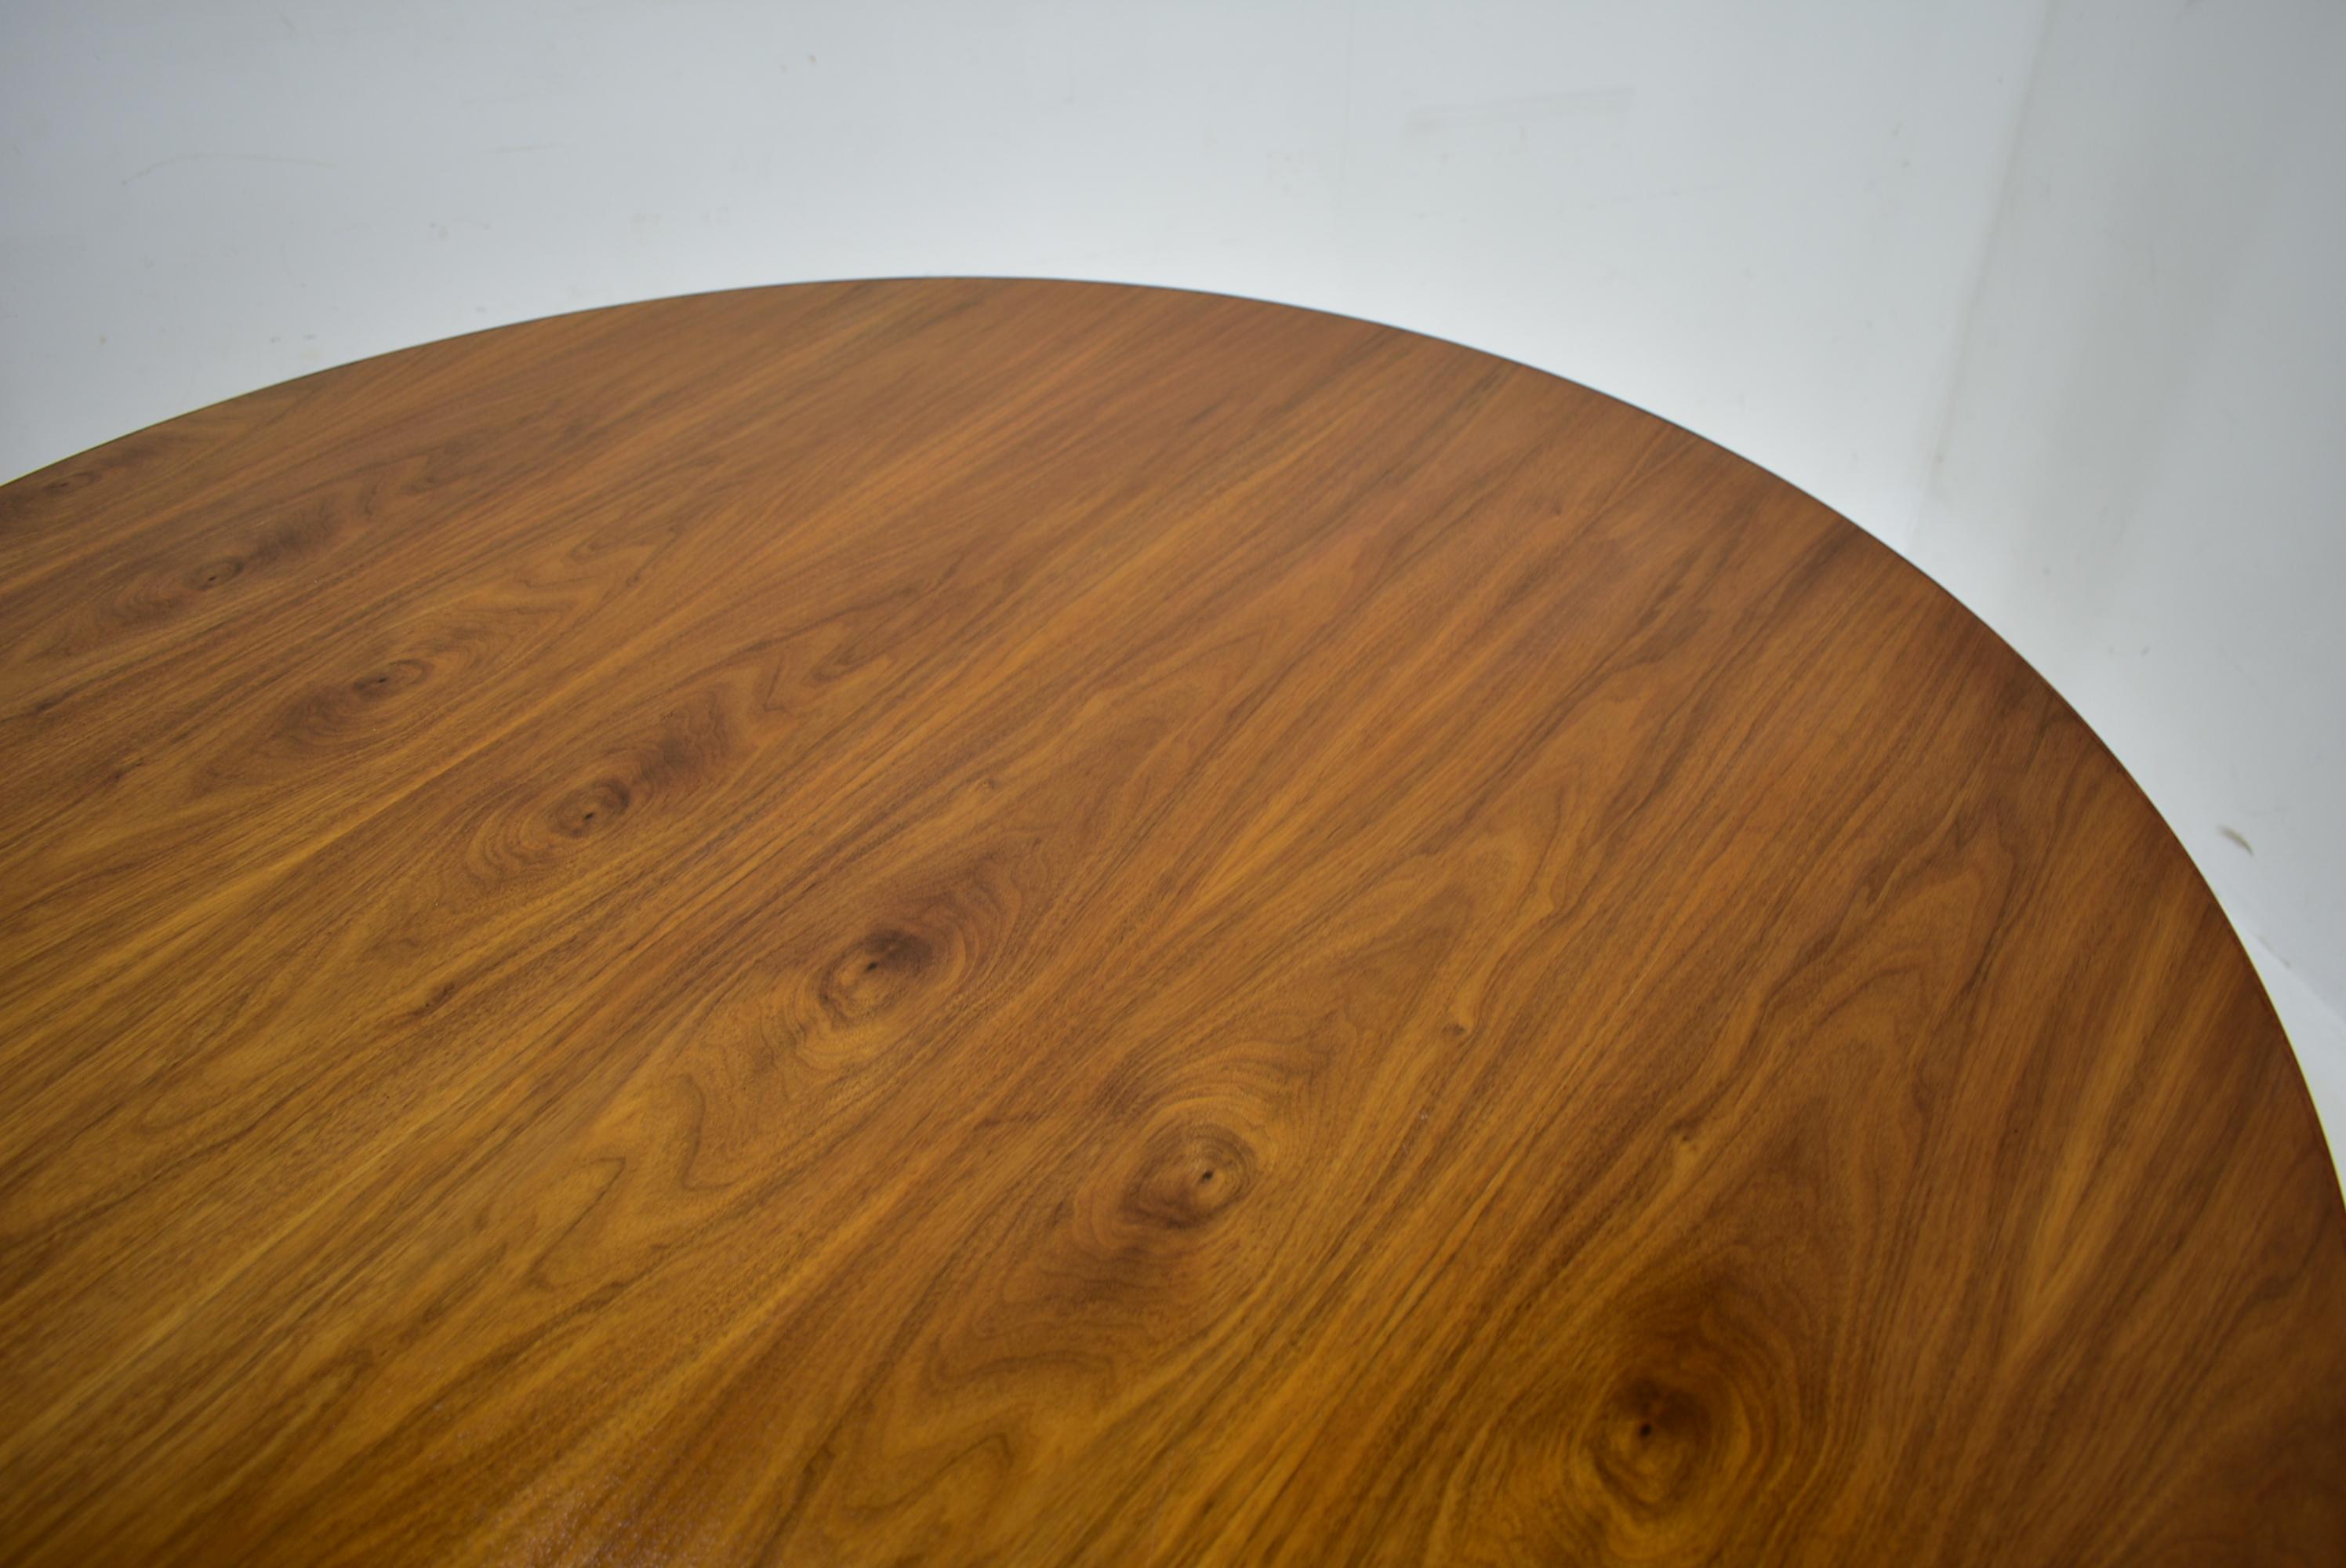 - Made in Czechoslovakia
- Made of beech, veneer, cast iron
- The table is Stabil
- Cleaned
- repolished